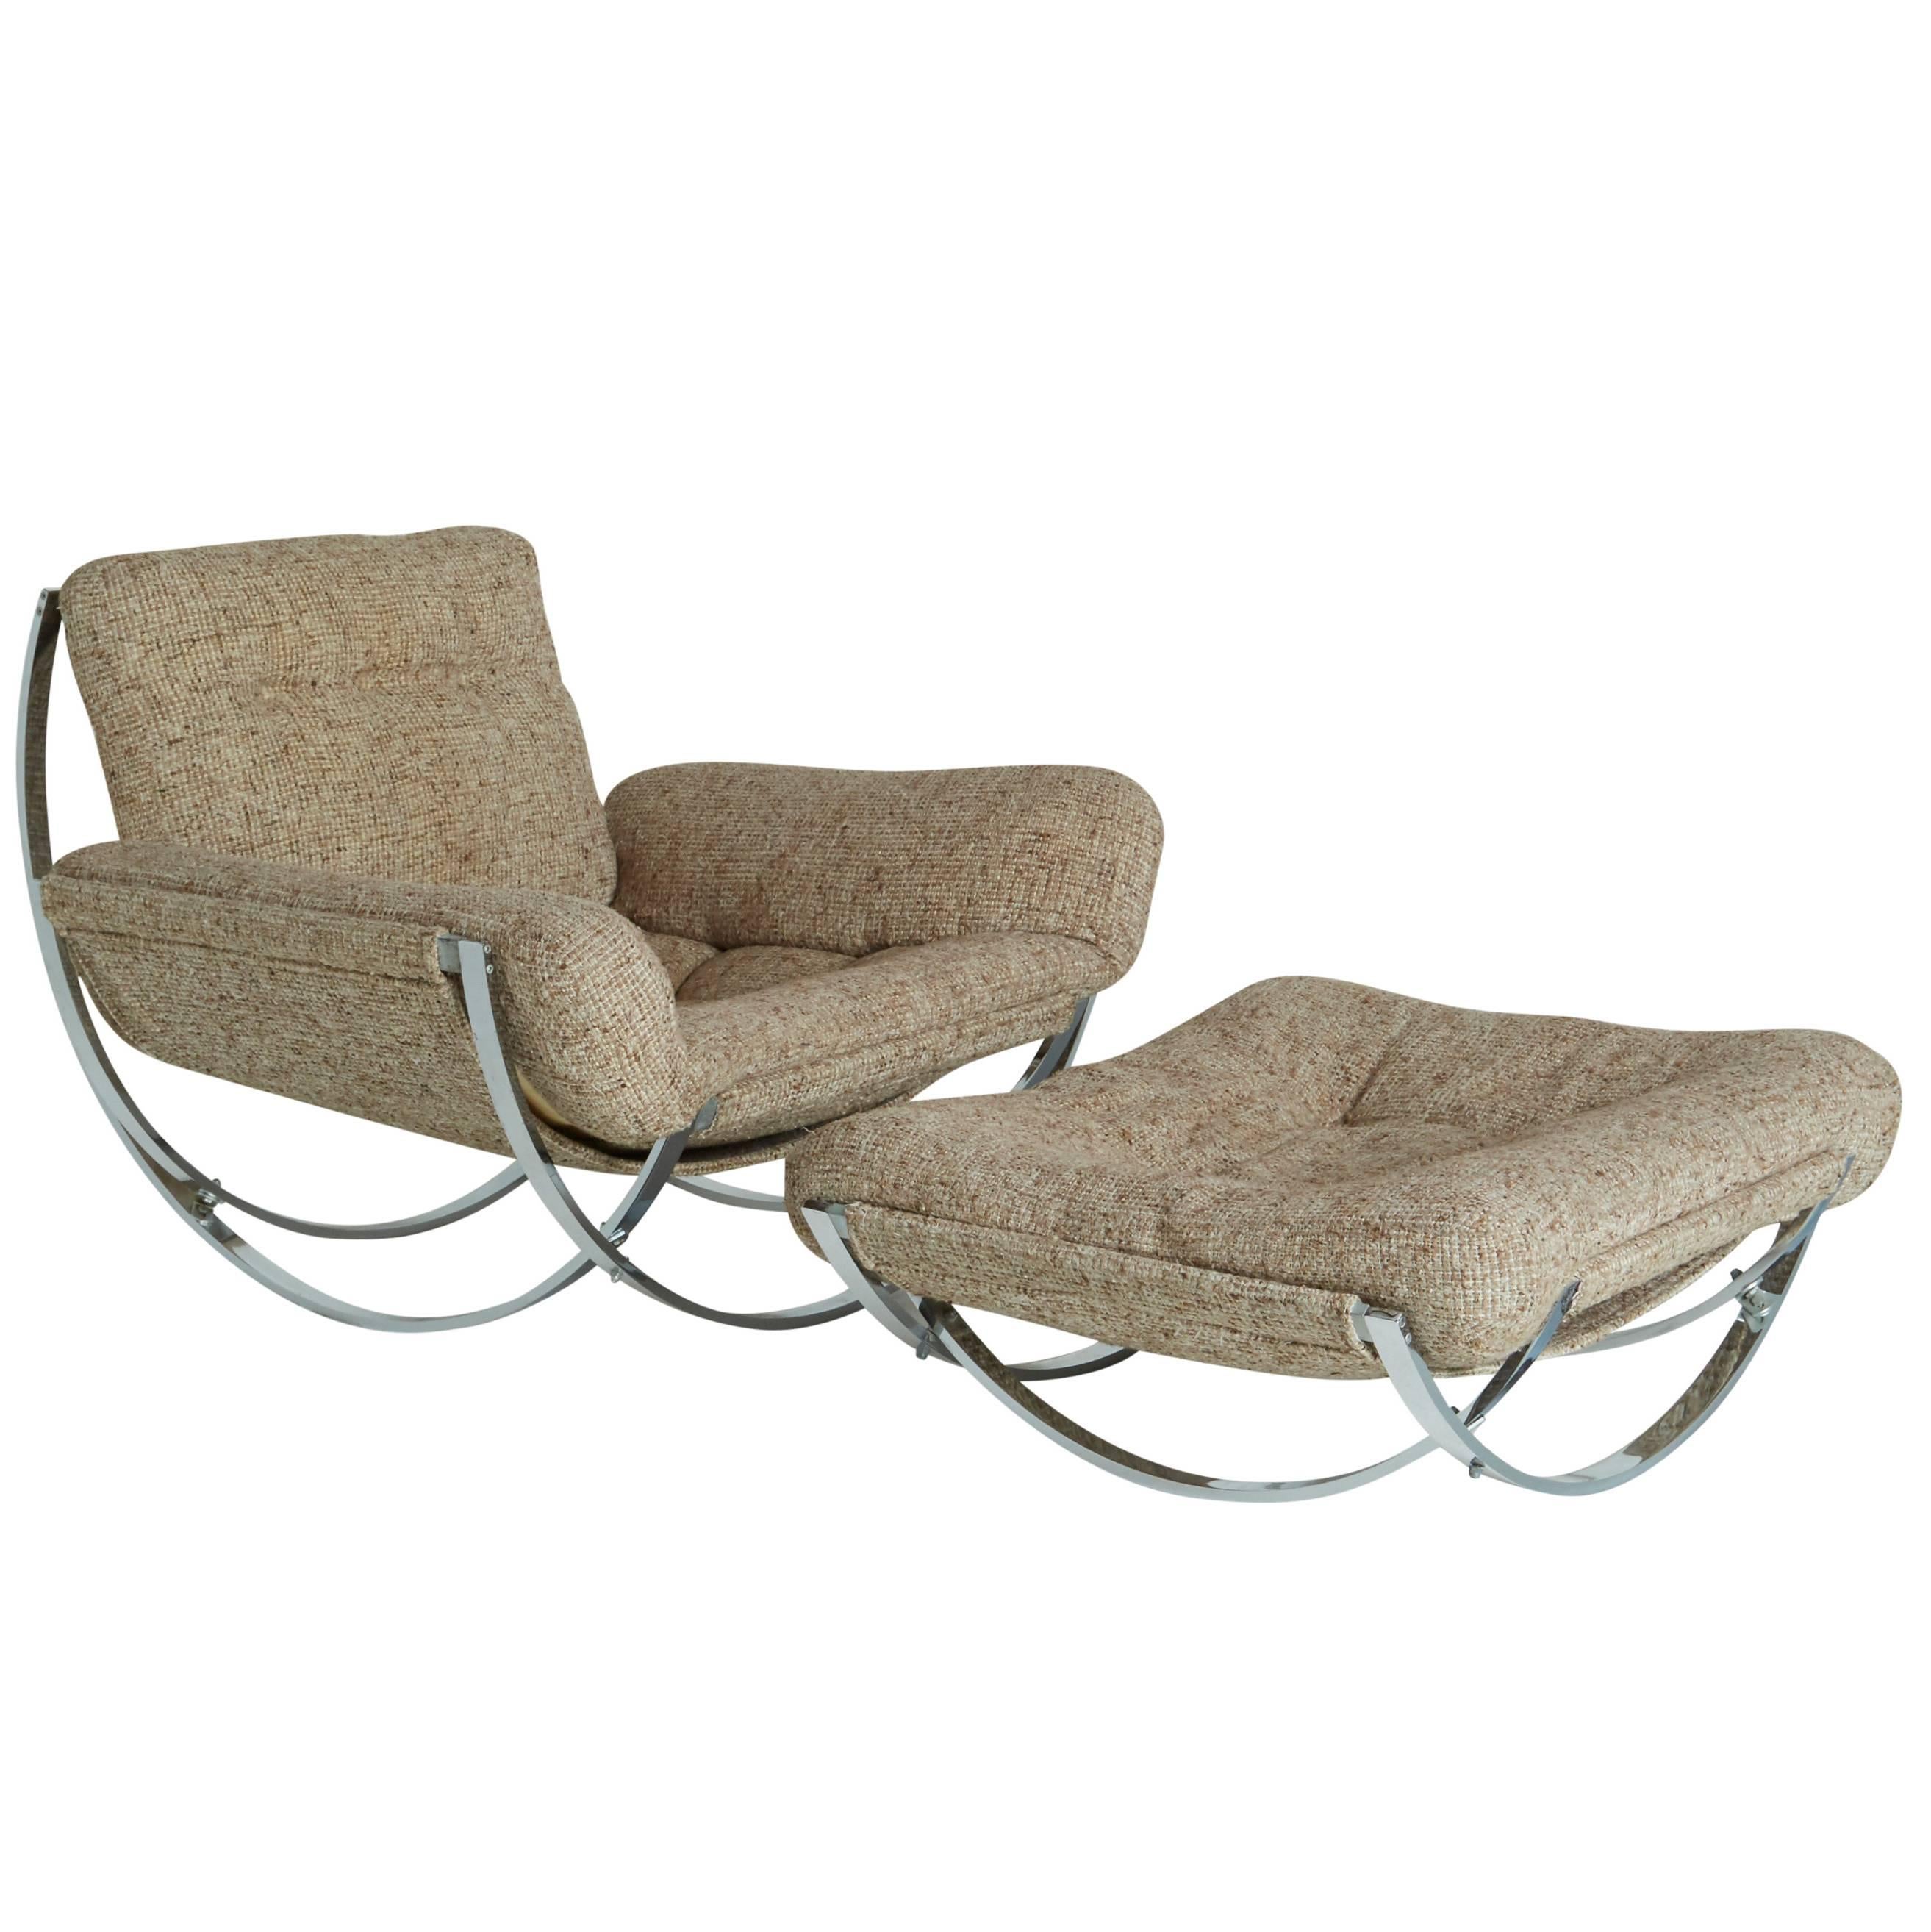 Floating Tan Wool Sculptural Lounge Chair and Ottoman by Lennart Bender, 1970s